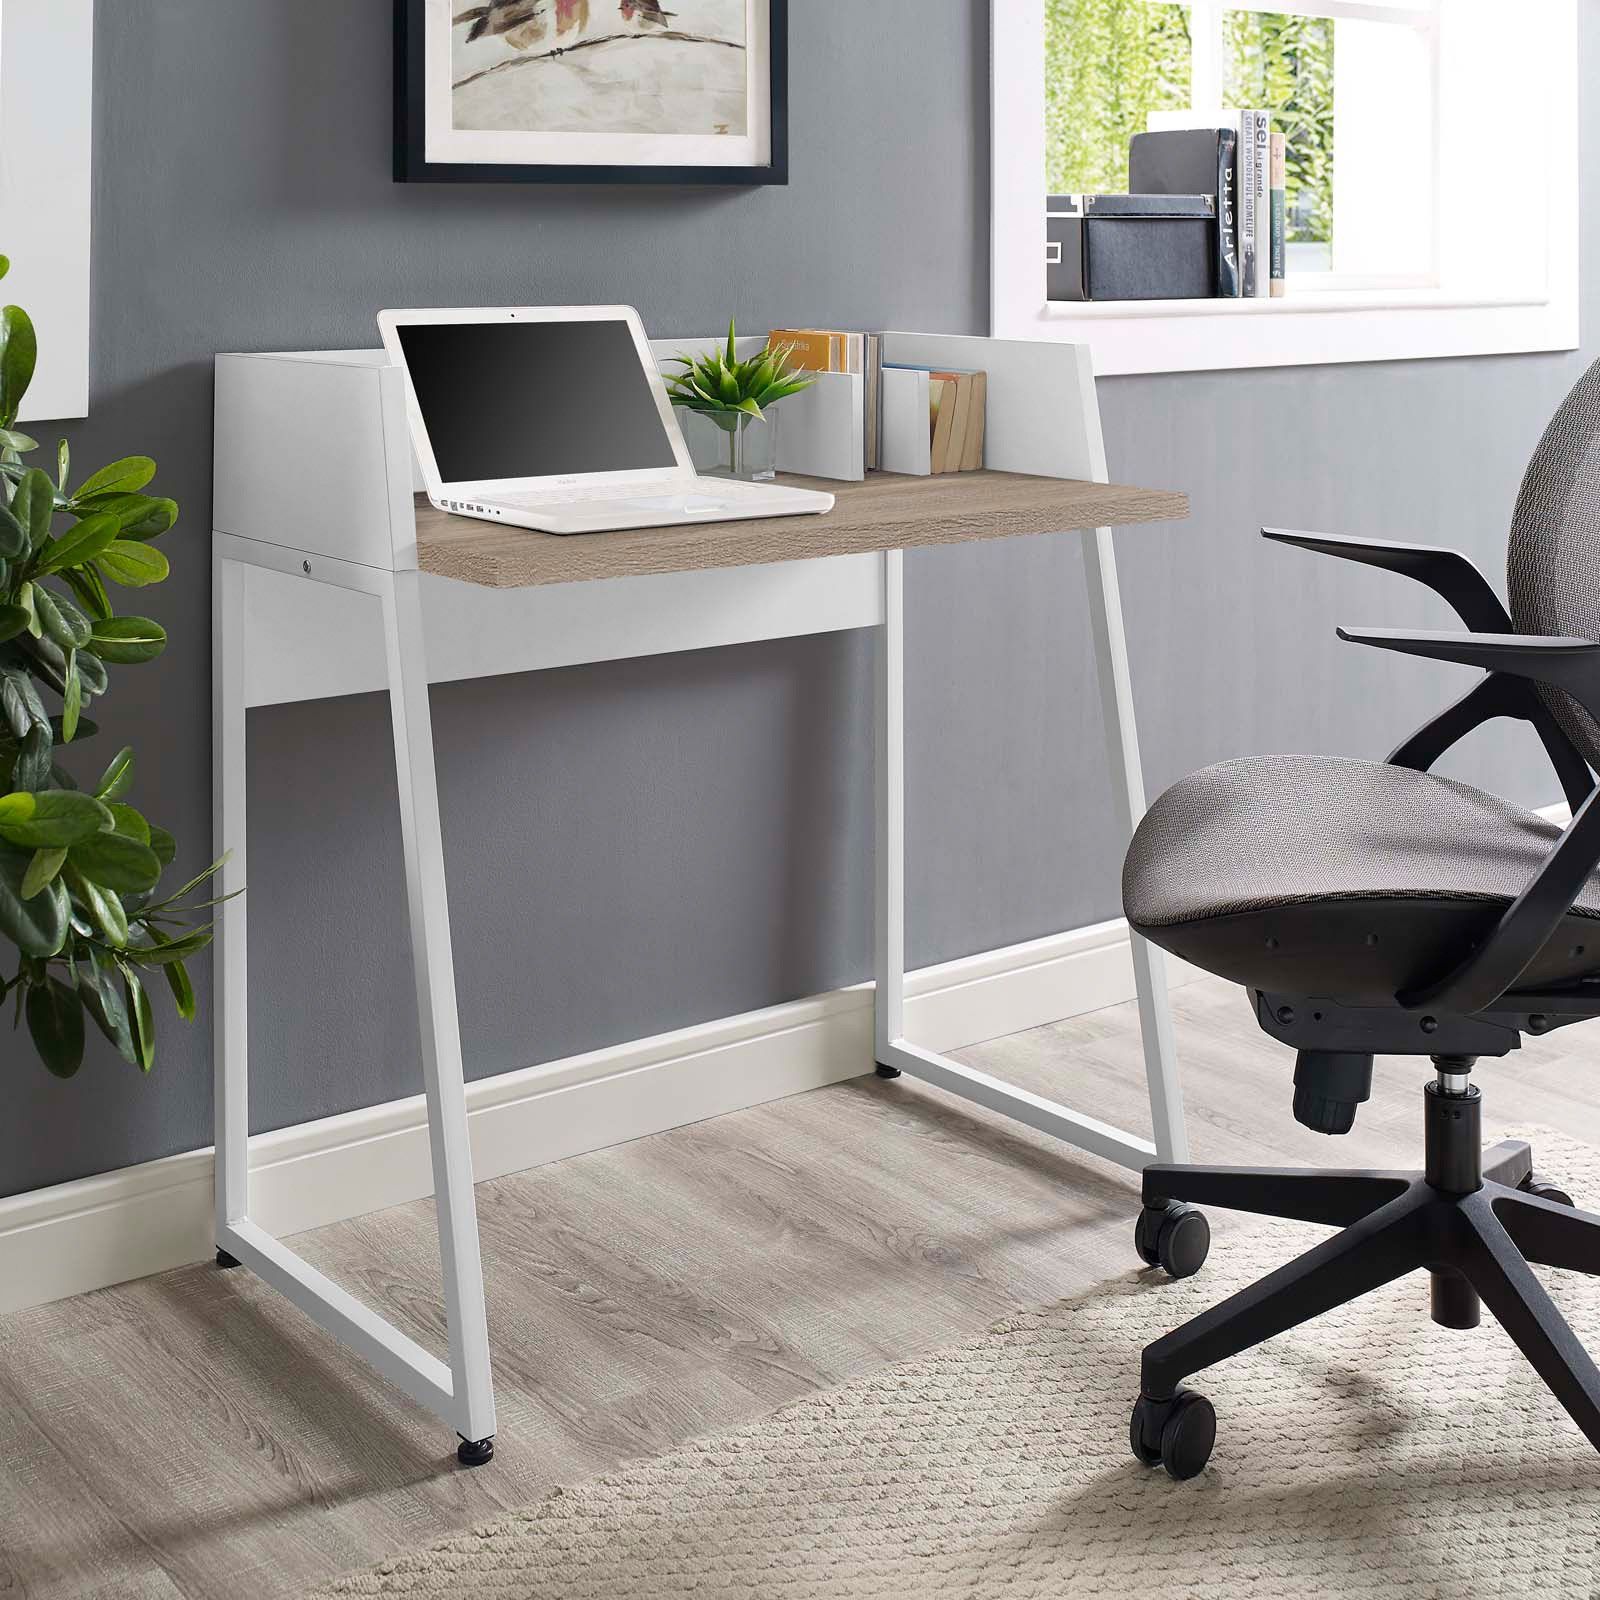 Modway Relay Wood Writing Desk In White Natural – Walmart – Walmart For White And Cement Writing Desks (View 3 of 15)